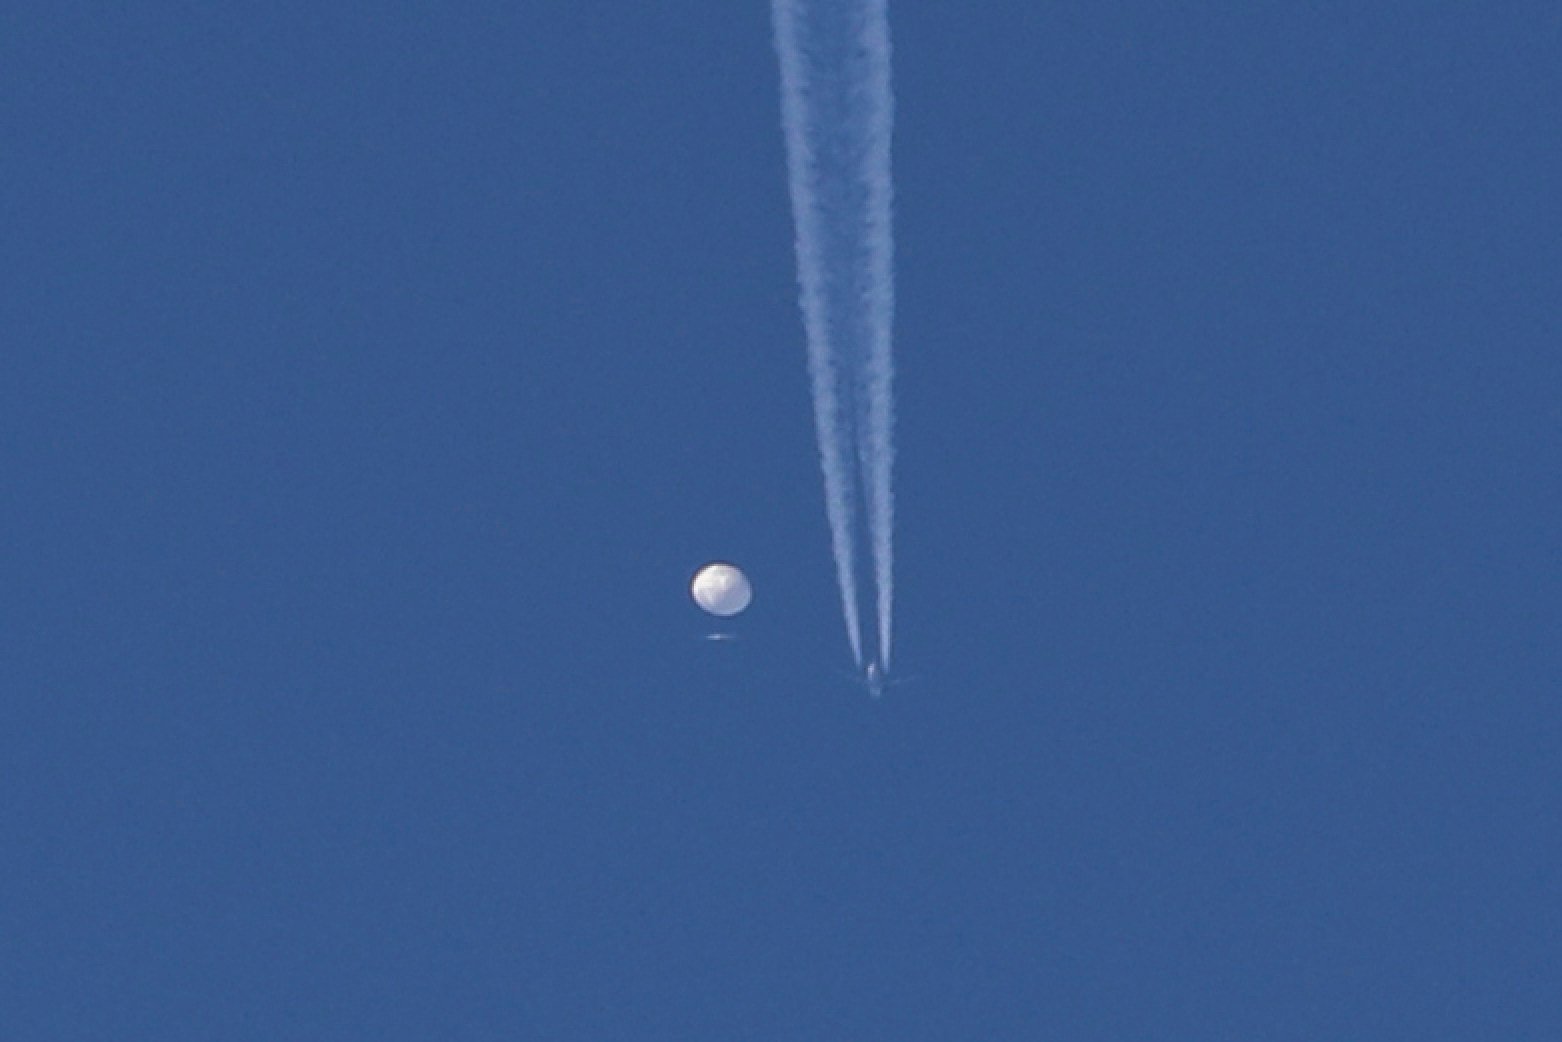 A large balloon drifts above the Kingstown, North Carolina, US area, with a plane and its contrail seen below it. The United States said it is a Chinese spy balloon. Photo: Brian Branch via AP